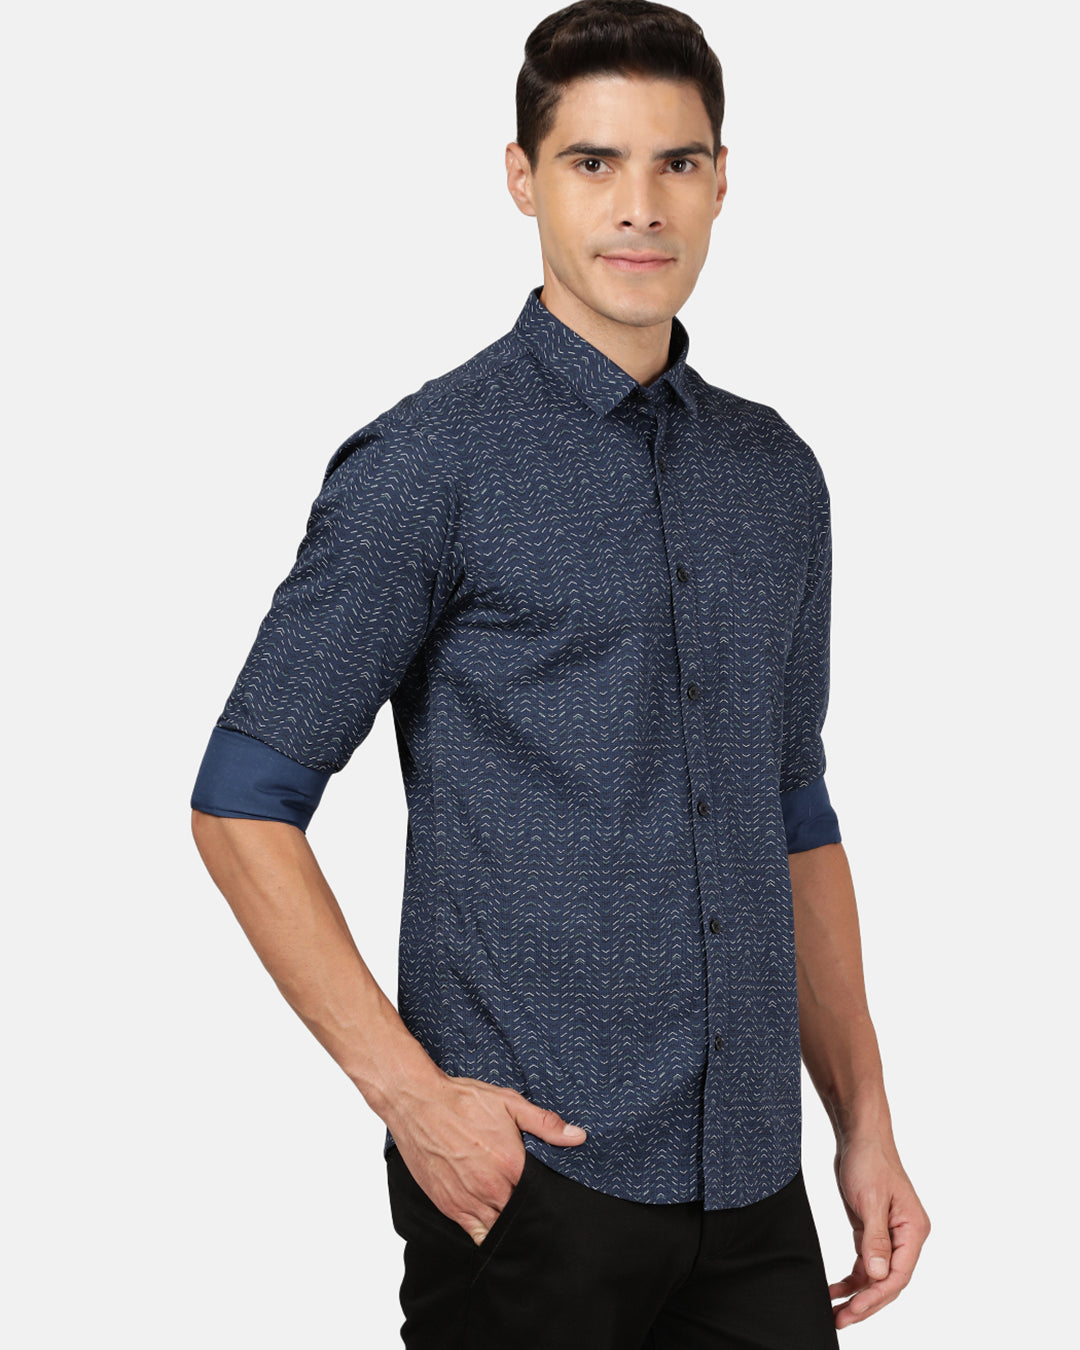 Crocodile Casual Full Sleeve Slim Fit Printed Dark Blue with Collar Shirt for Men